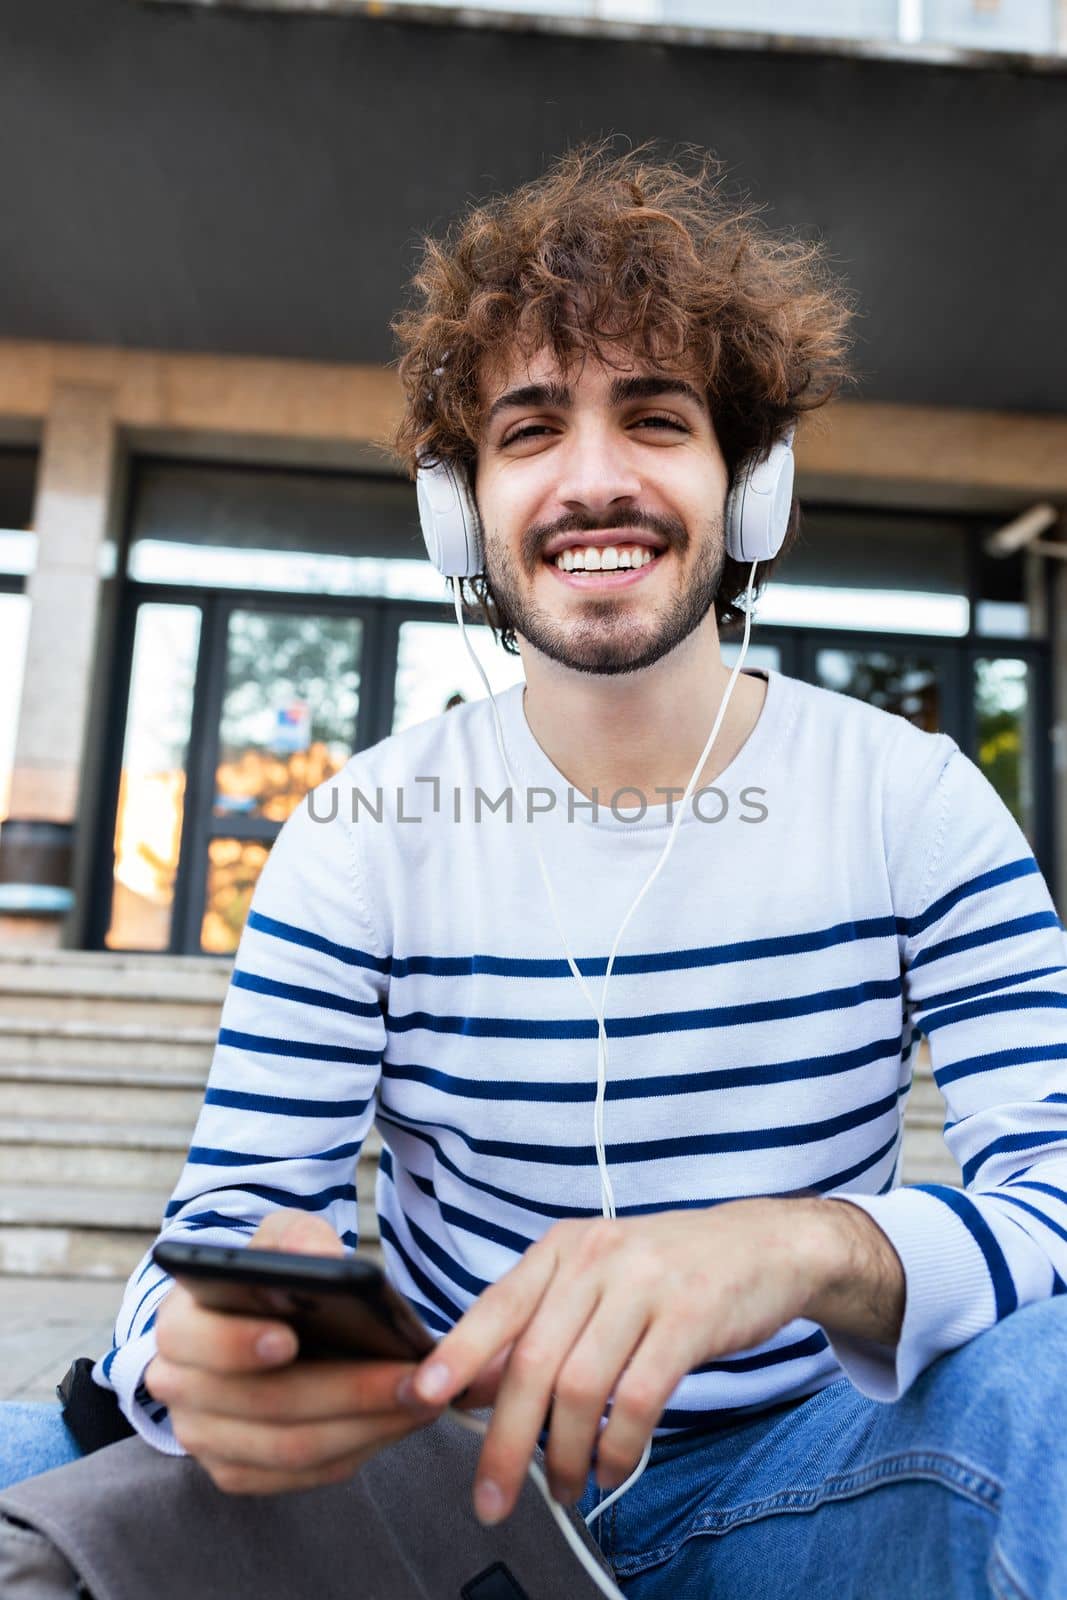 Vertical portrait of happy young university student sitting on stairs in campus wearing headphones and using phone looking at camera. Education concept.